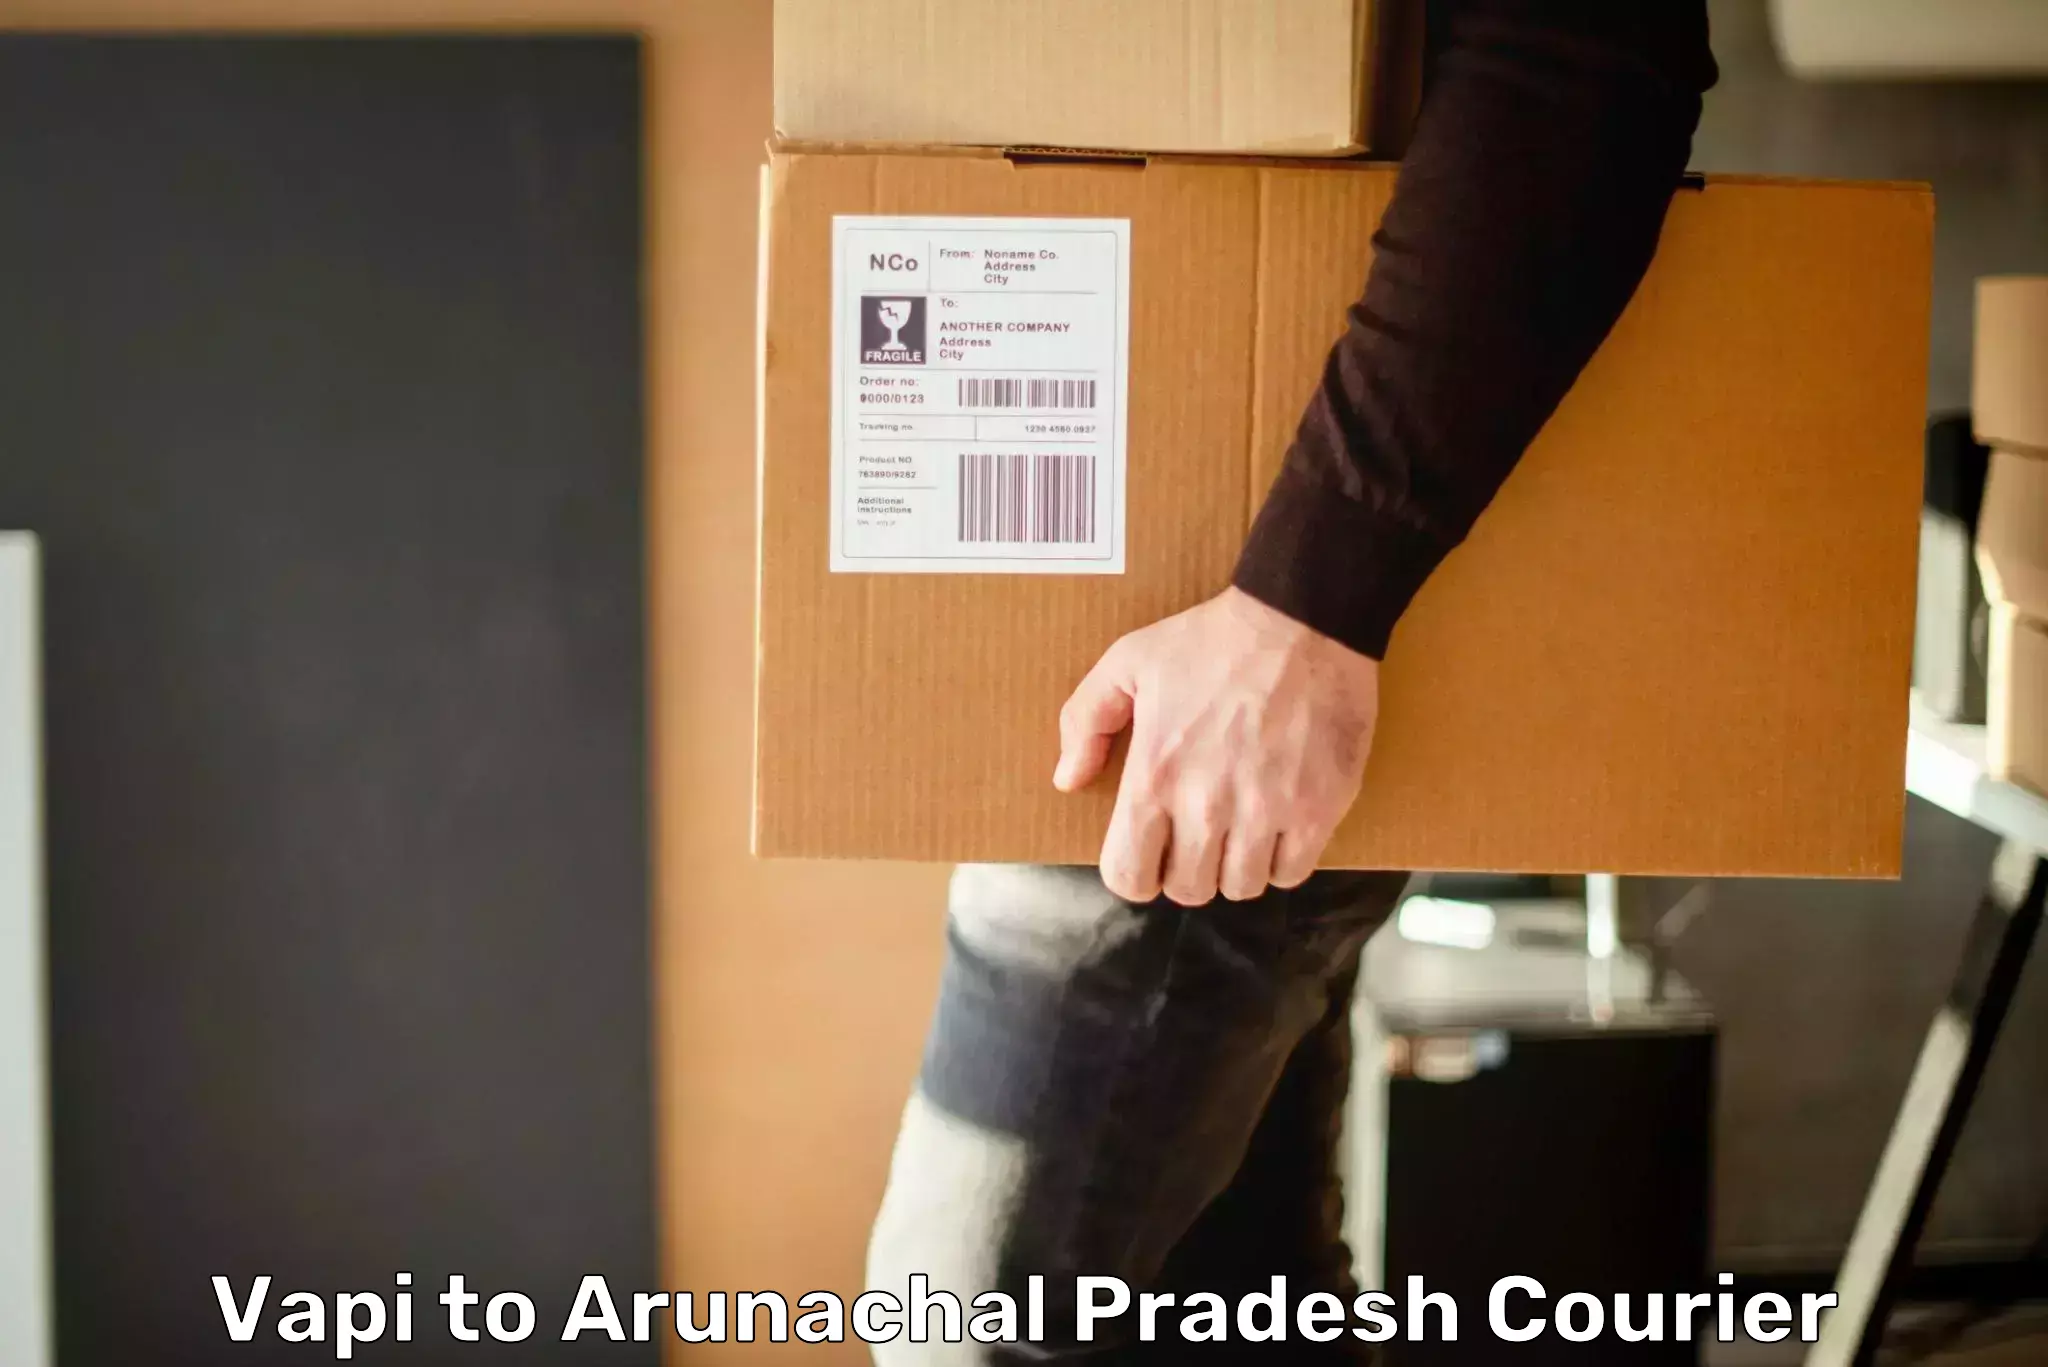 State-of-the-art courier technology Vapi to Lohit